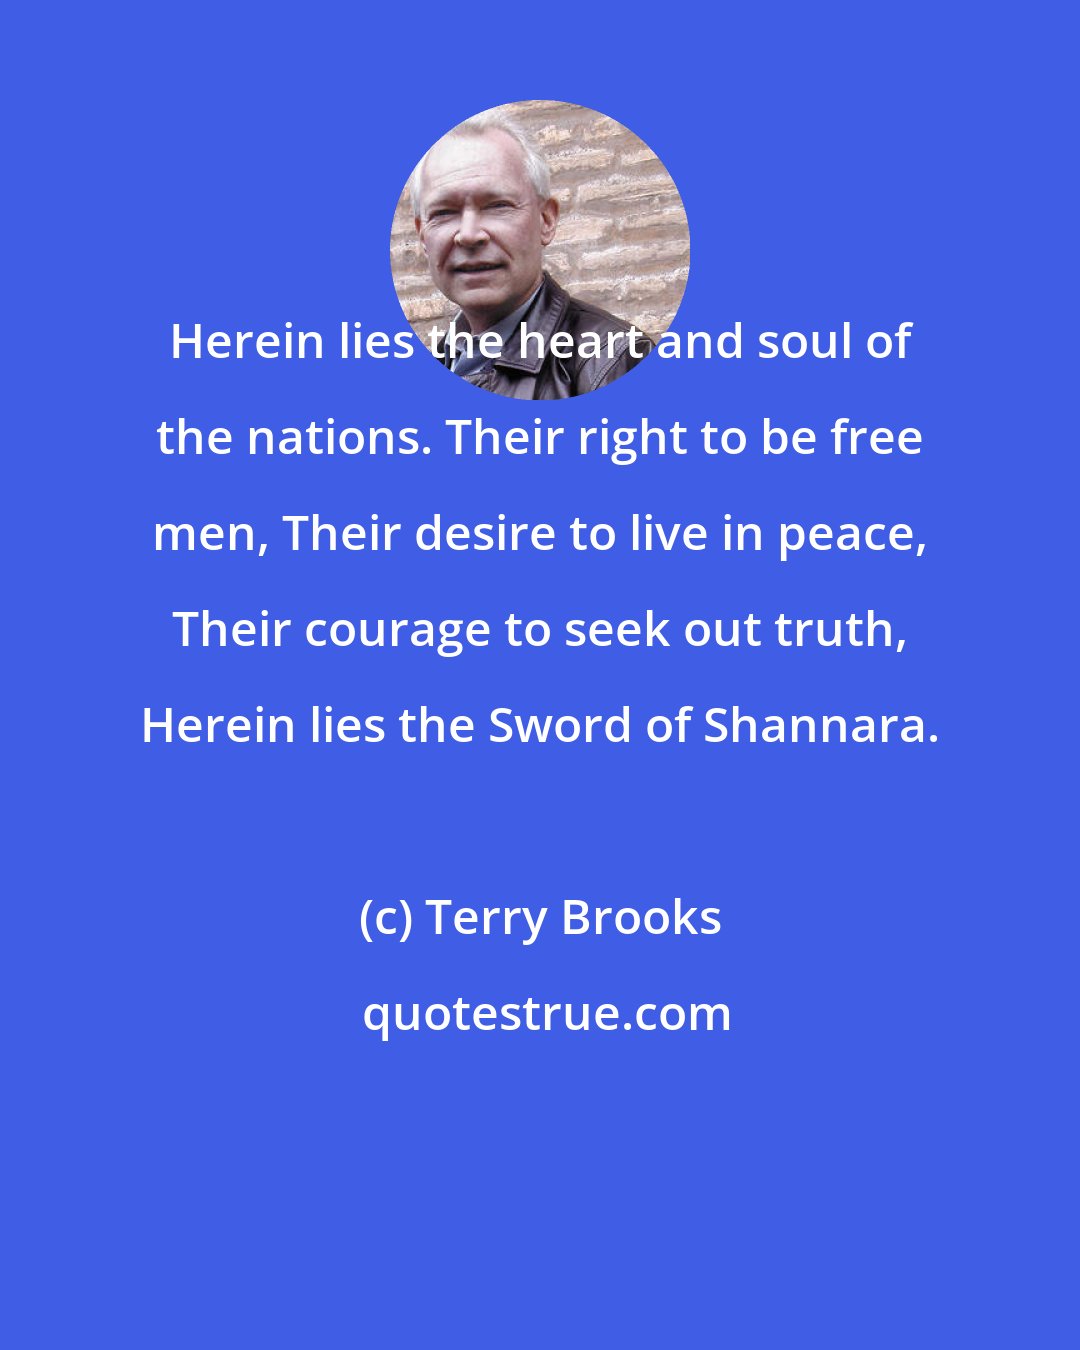 Terry Brooks: Herein lies the heart and soul of the nations. Their right to be free men, Their desire to live in peace, Their courage to seek out truth, Herein lies the Sword of Shannara.